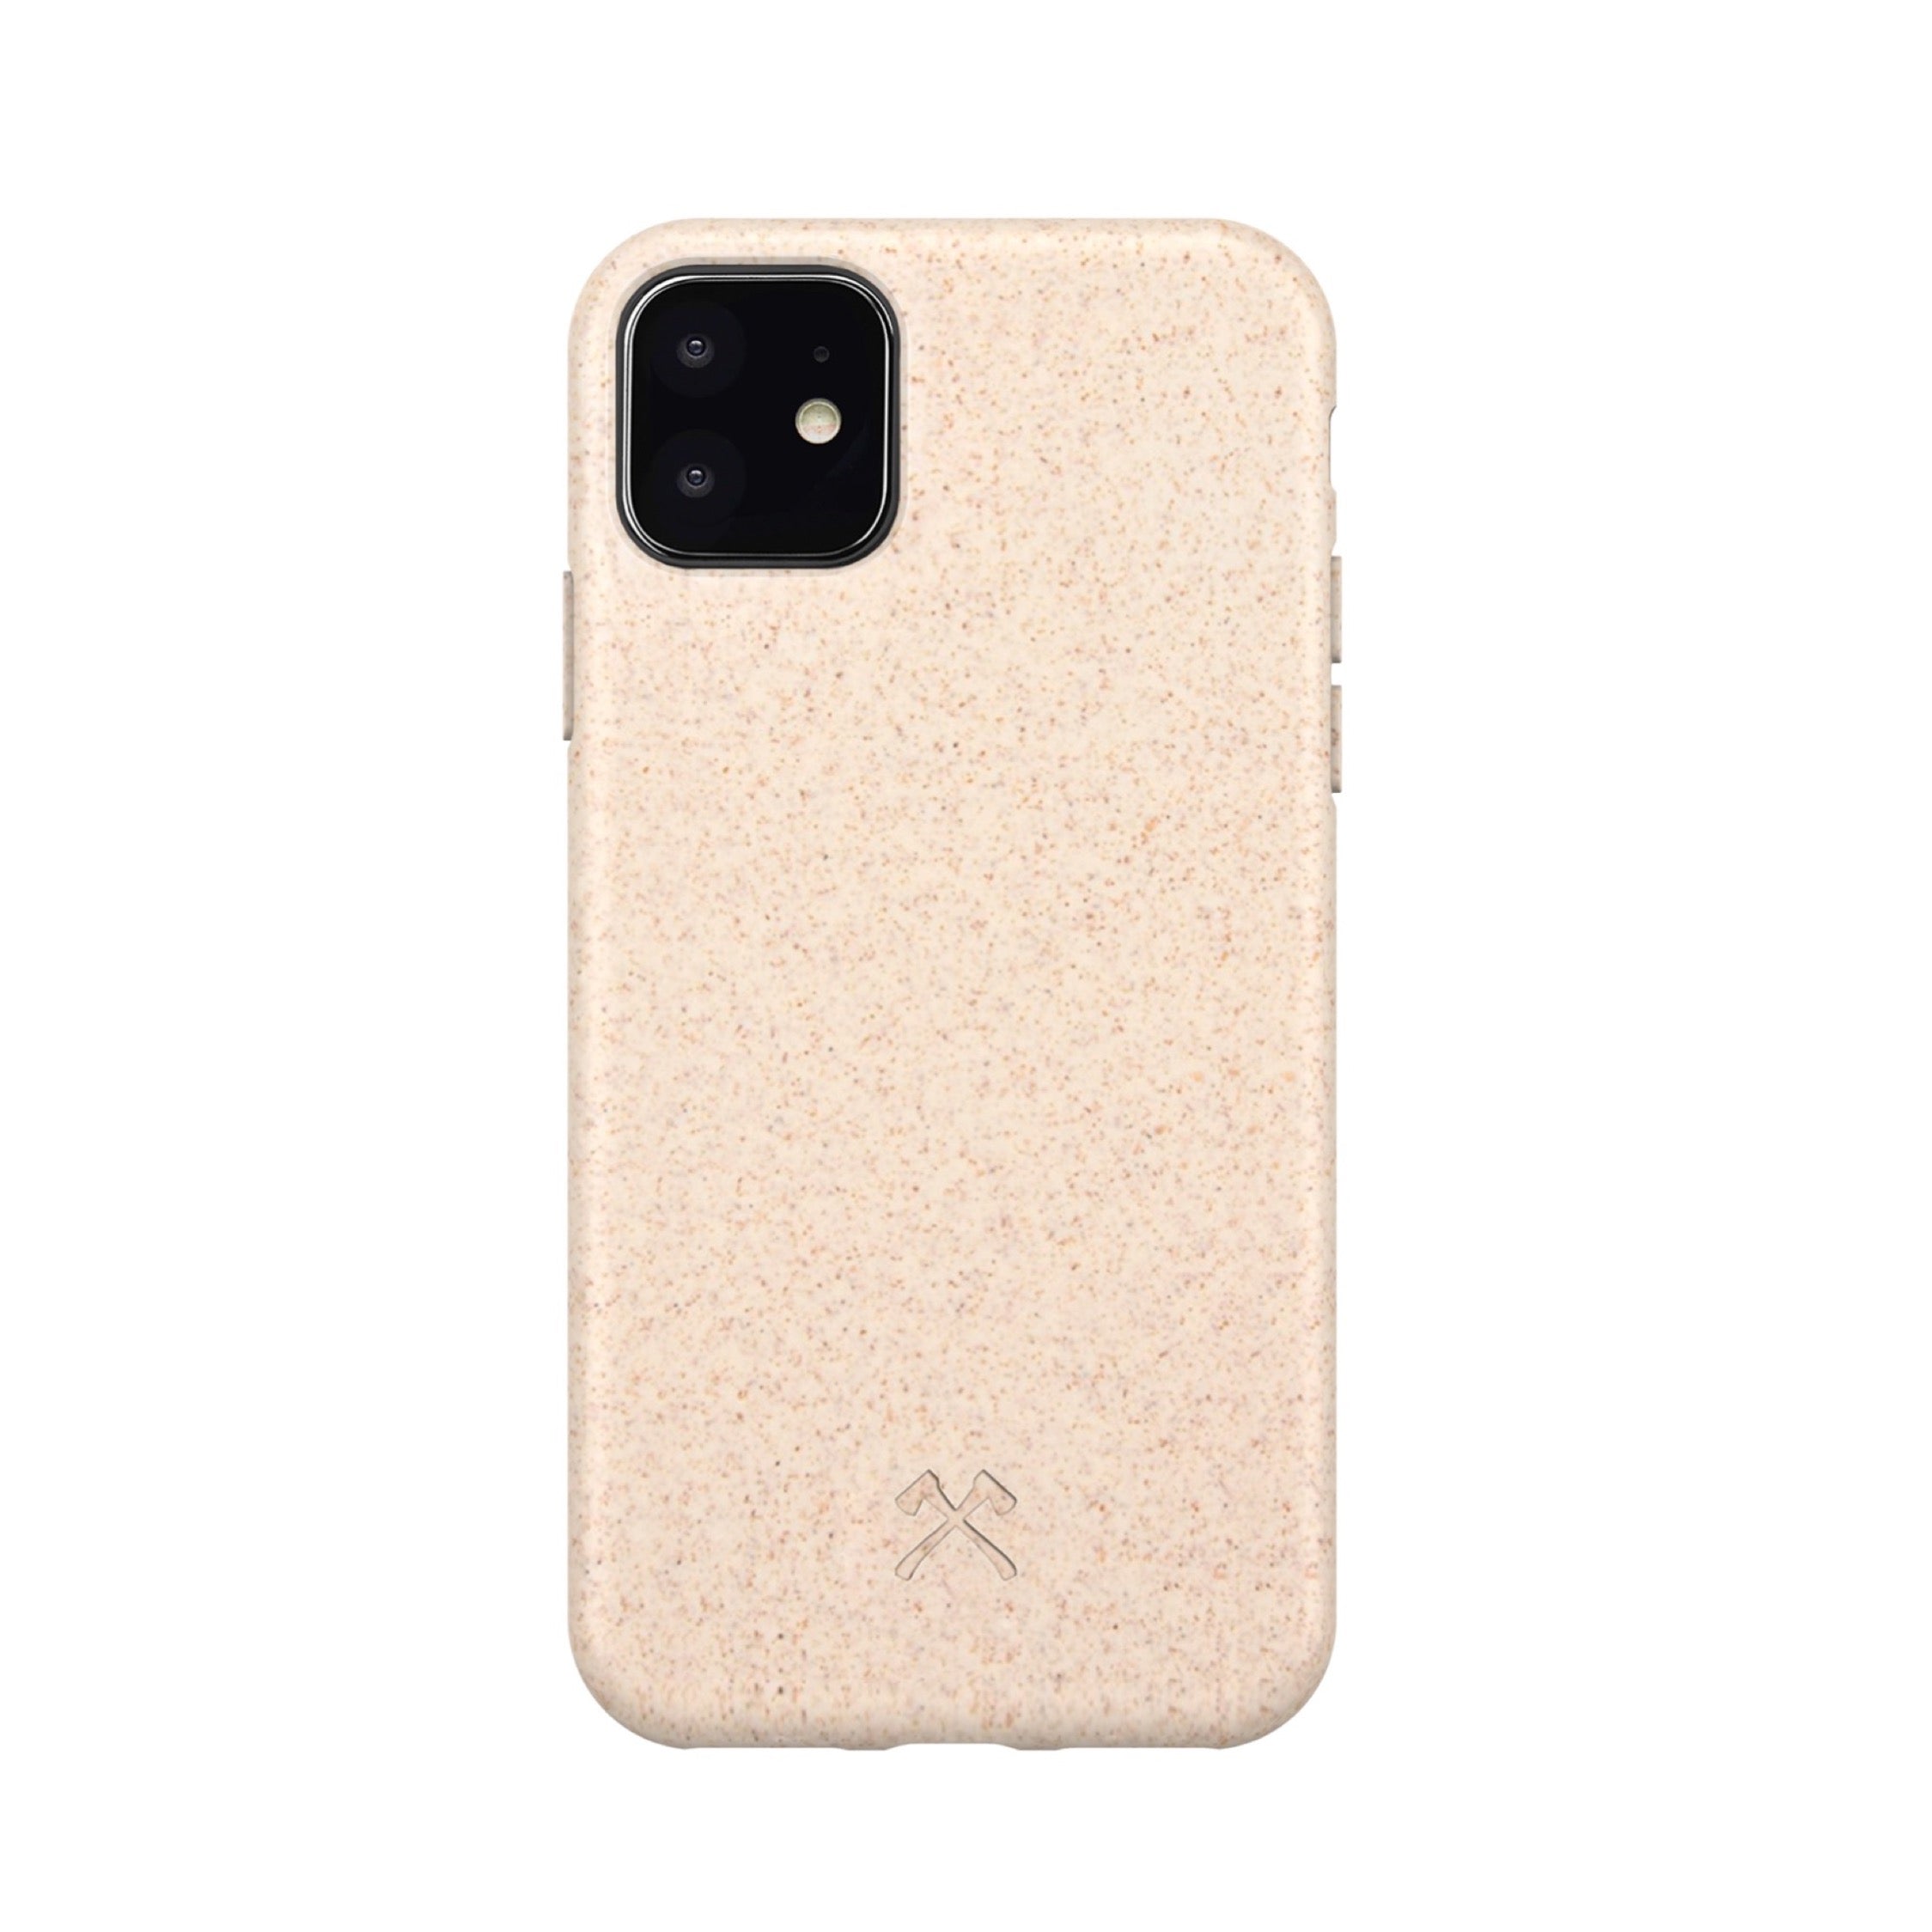 Woodcessories Bio Case for New iPhone 11 Cases - Ante Shop